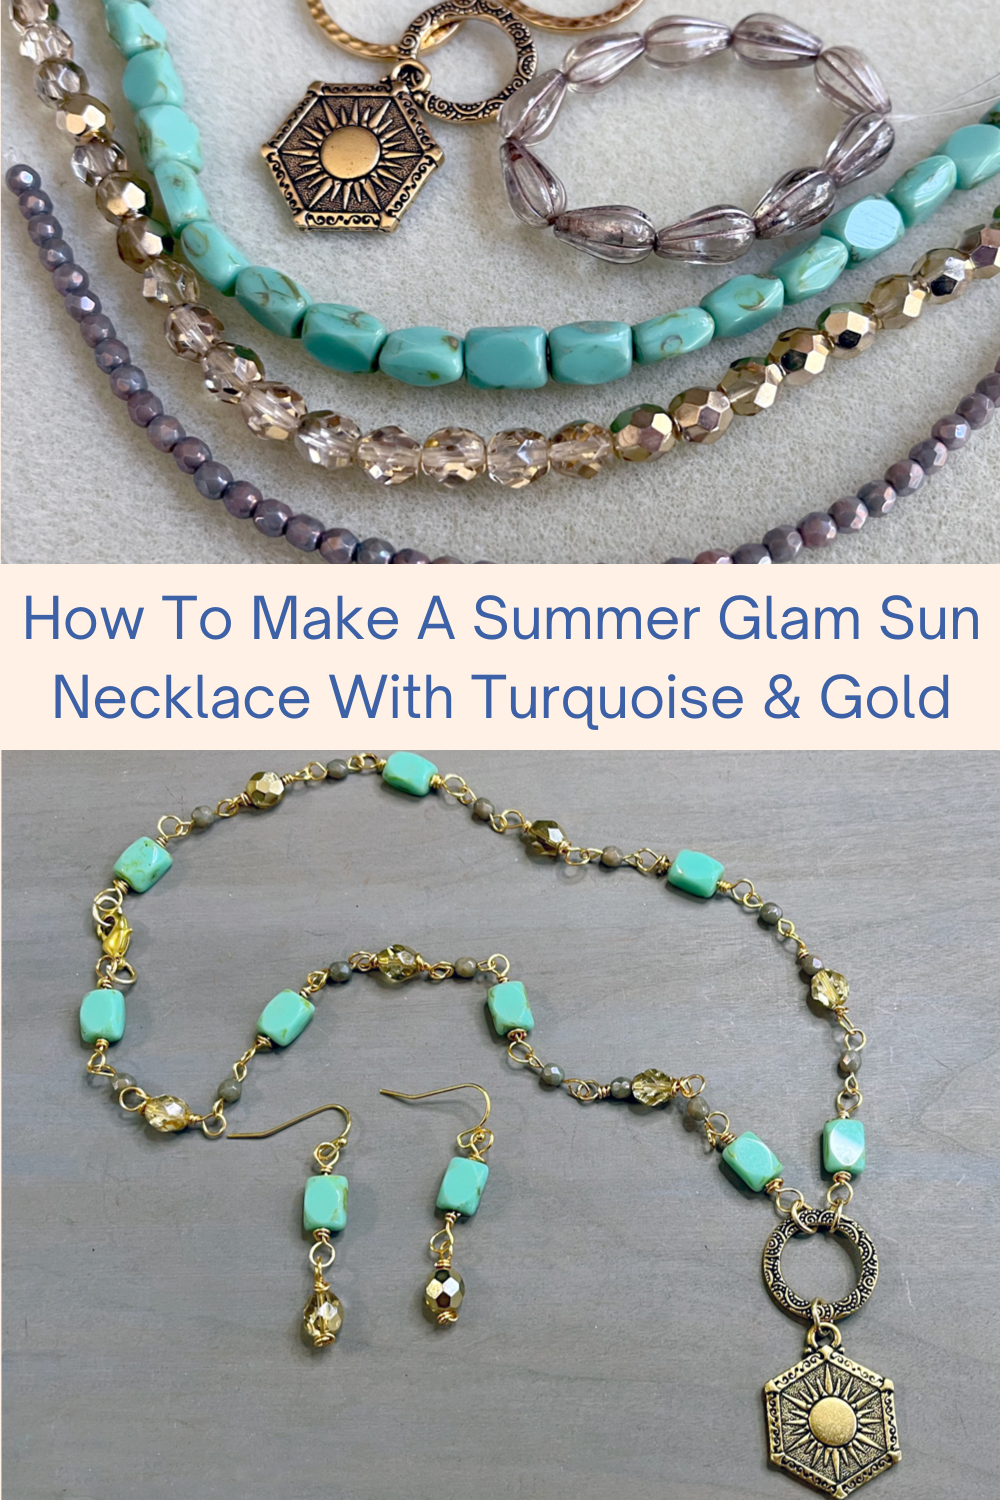 How To Make A Summer Glam Sun Necklace With Turquoise & Gold Collage